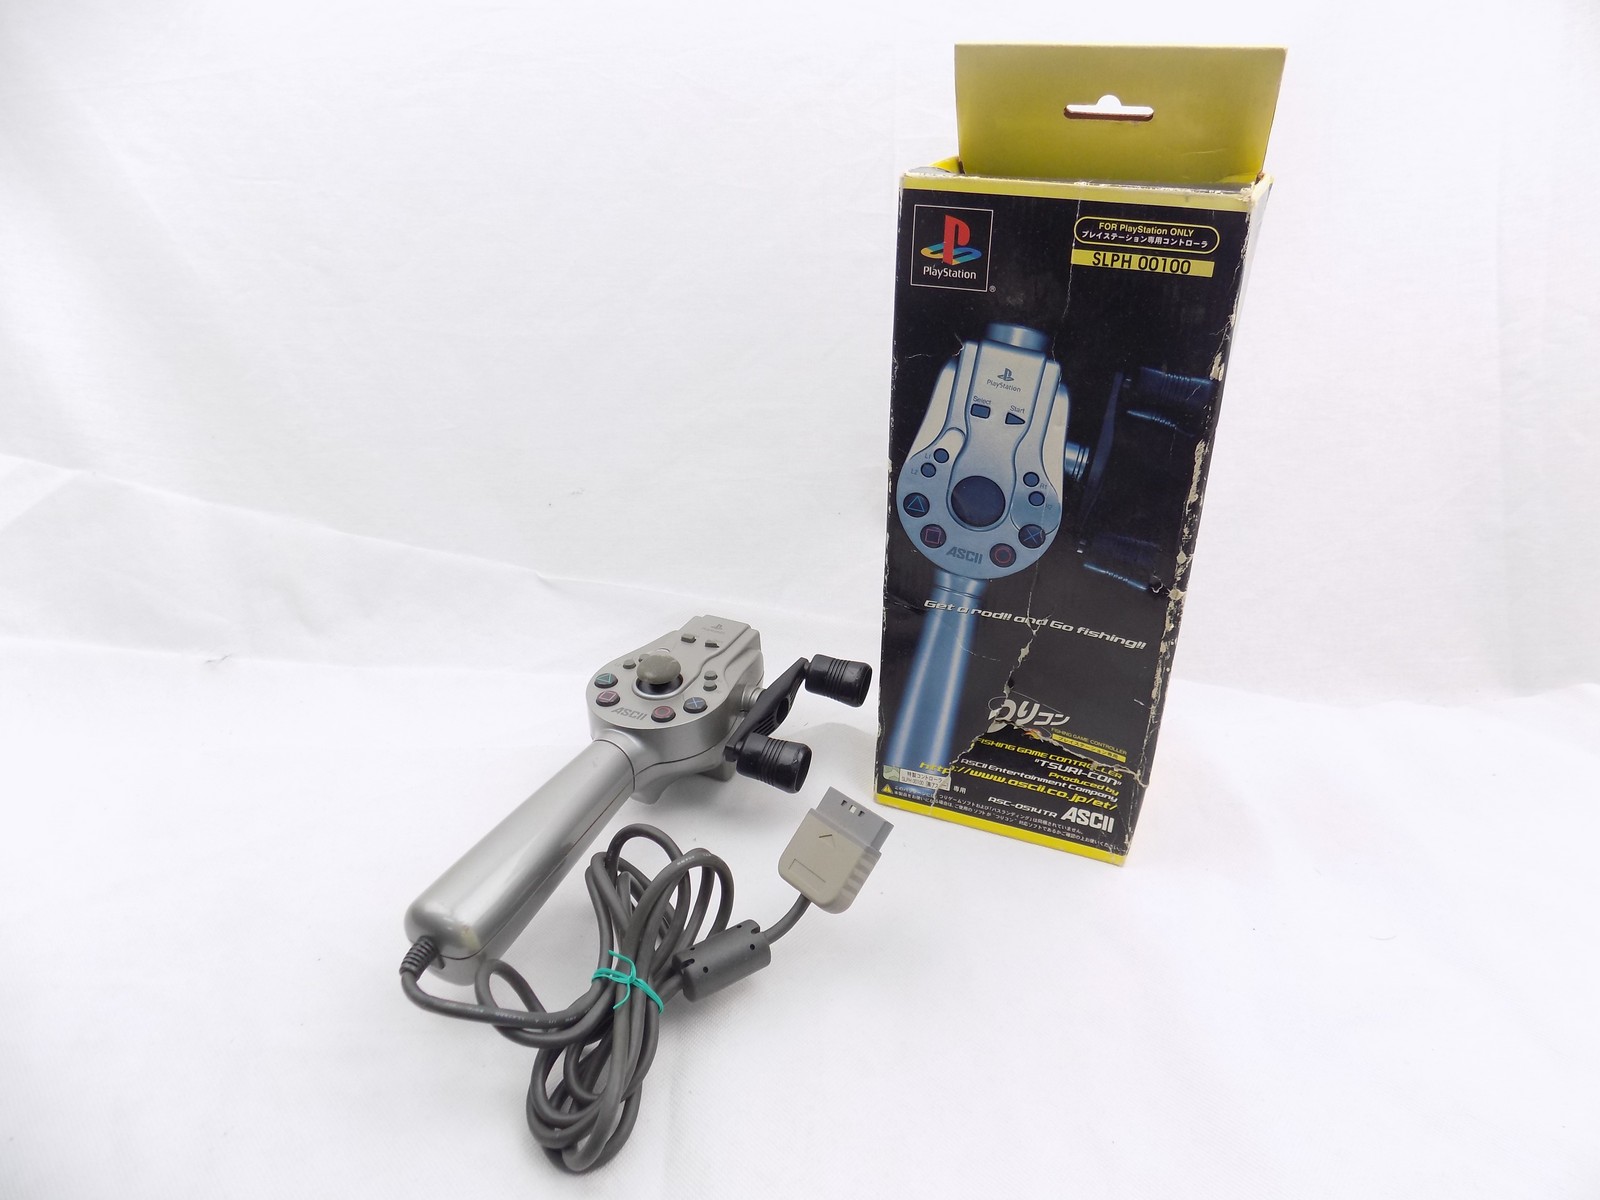 Boxed Playstation 1 Ps1 Ascii Fishing Rod Controller – Tested, Works! -  Starboard Games